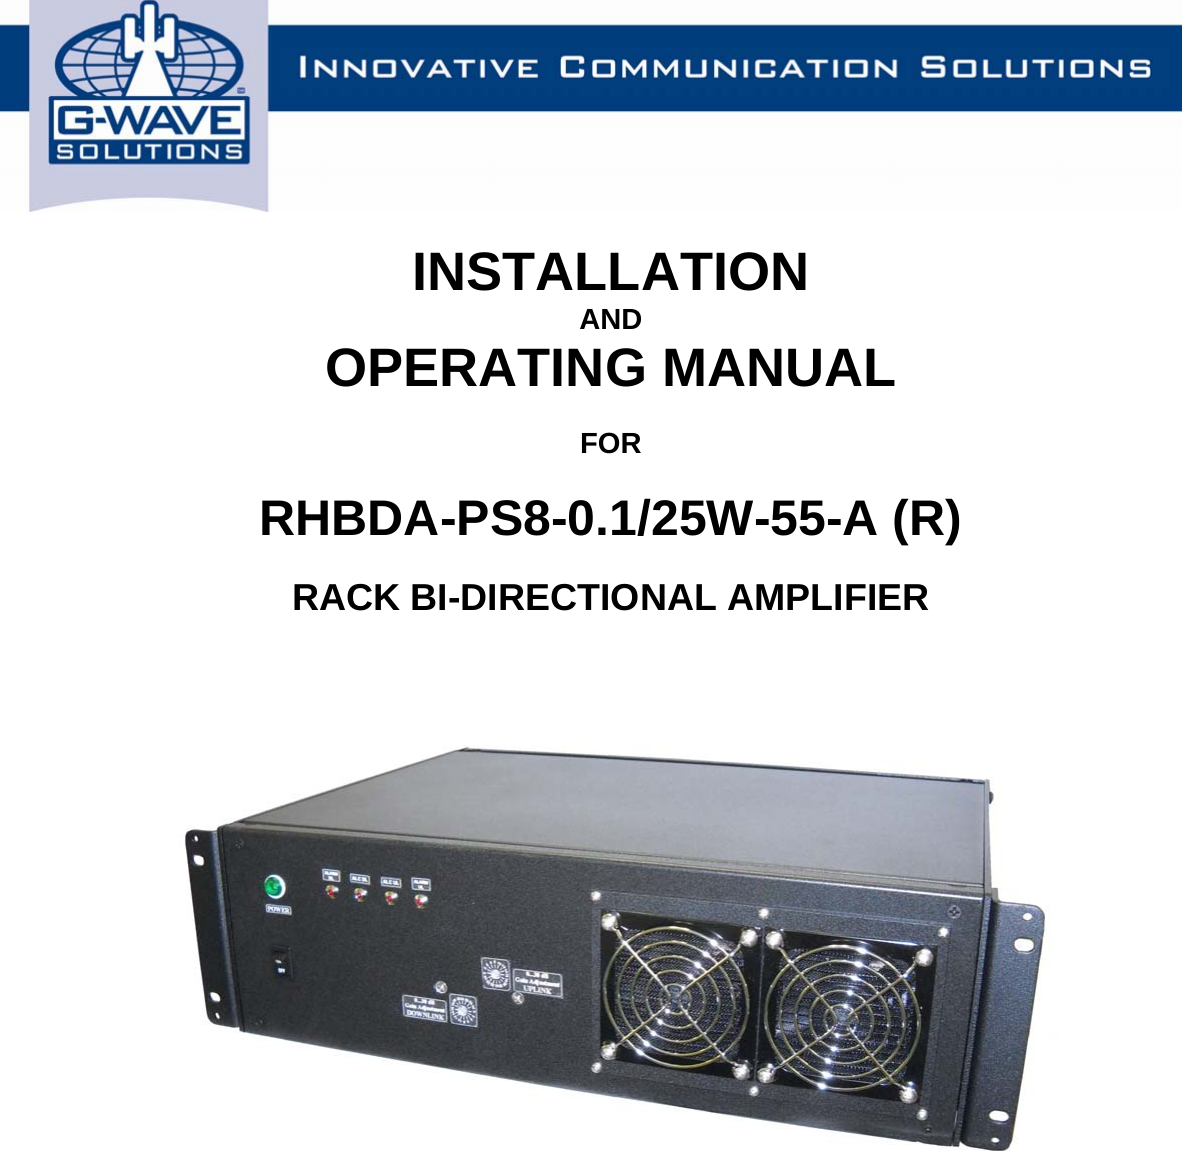  INSTALLATION AND OPERATING MANUAL  FOR  RHBDA-PS8-0.1/25W-55-A (R)  RACK BI-DIRECTIONAL AMPLIFIER                    